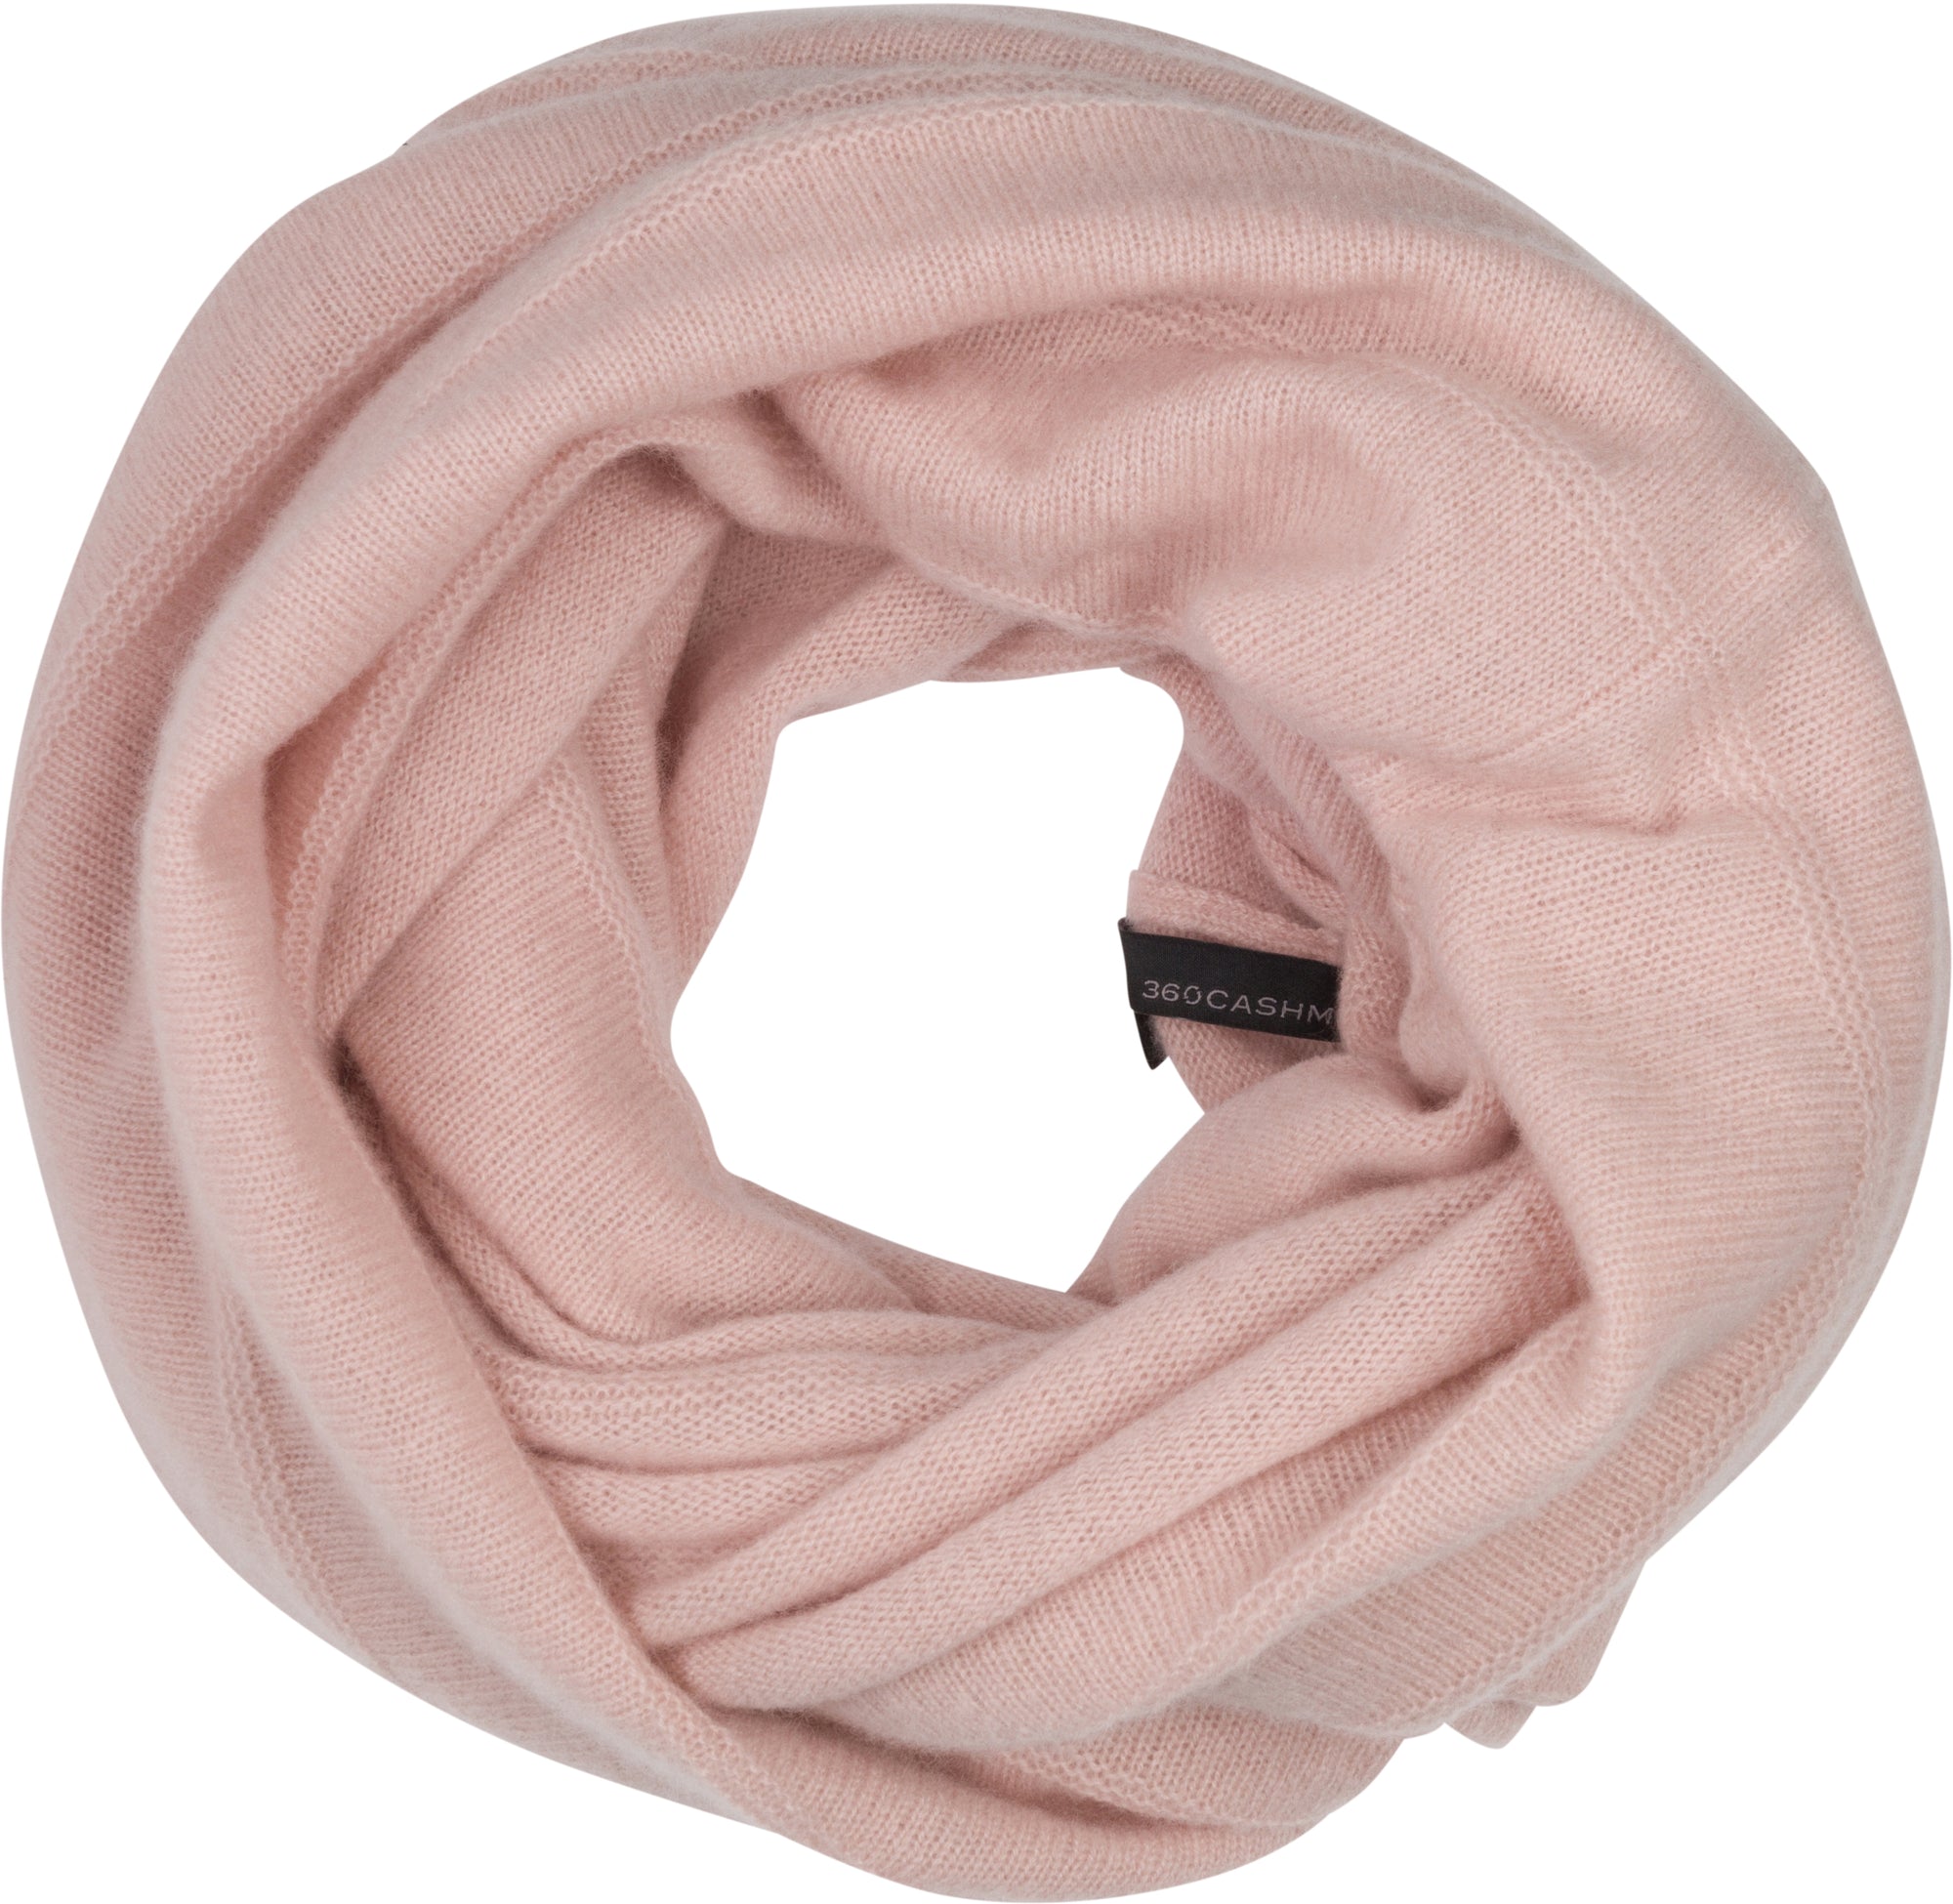 Eloise Infinity Scarf by 360 Cashmere